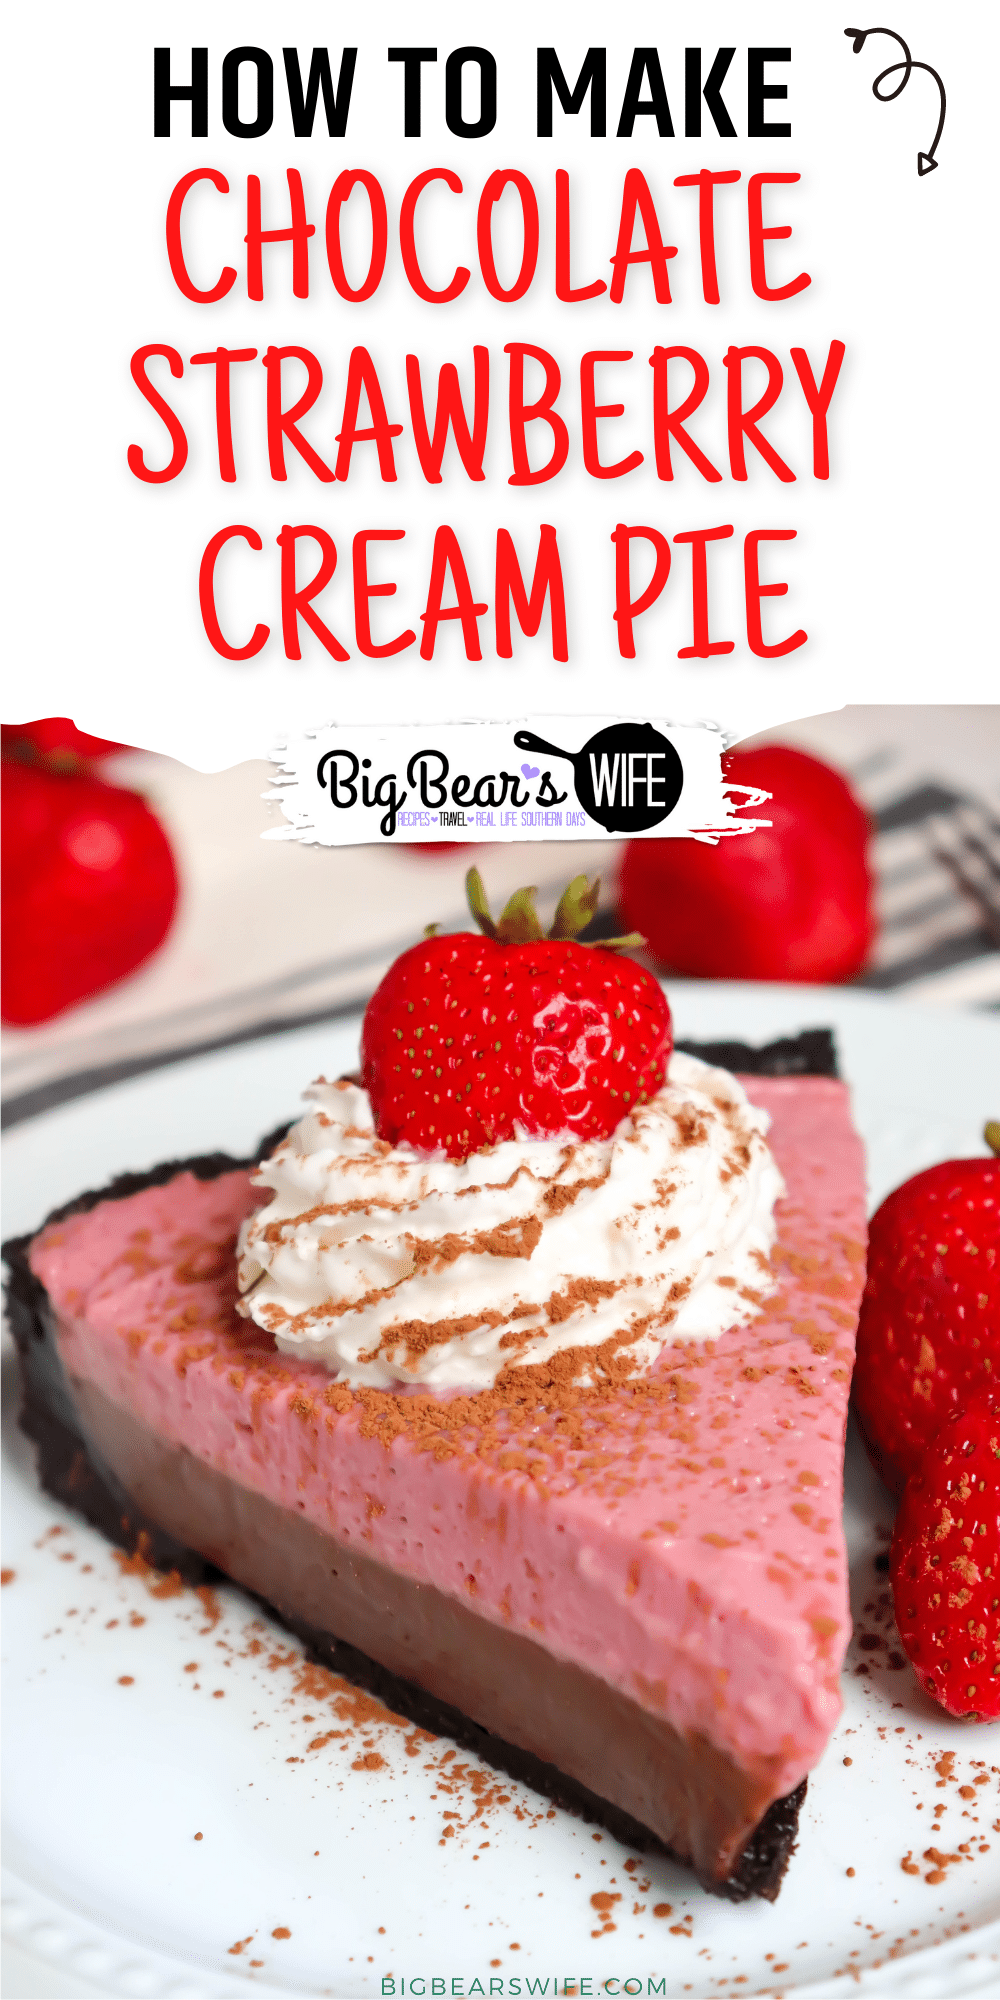 Love Chocolate and Strawberry together? This Chocolate Strawberry Cream Pie combines both flavors with a chocolate cookie crust, homemade chocolate pie layer that is topped with a homemade strawberry pudding pie layer and Crème Chantilly! via @bigbearswife